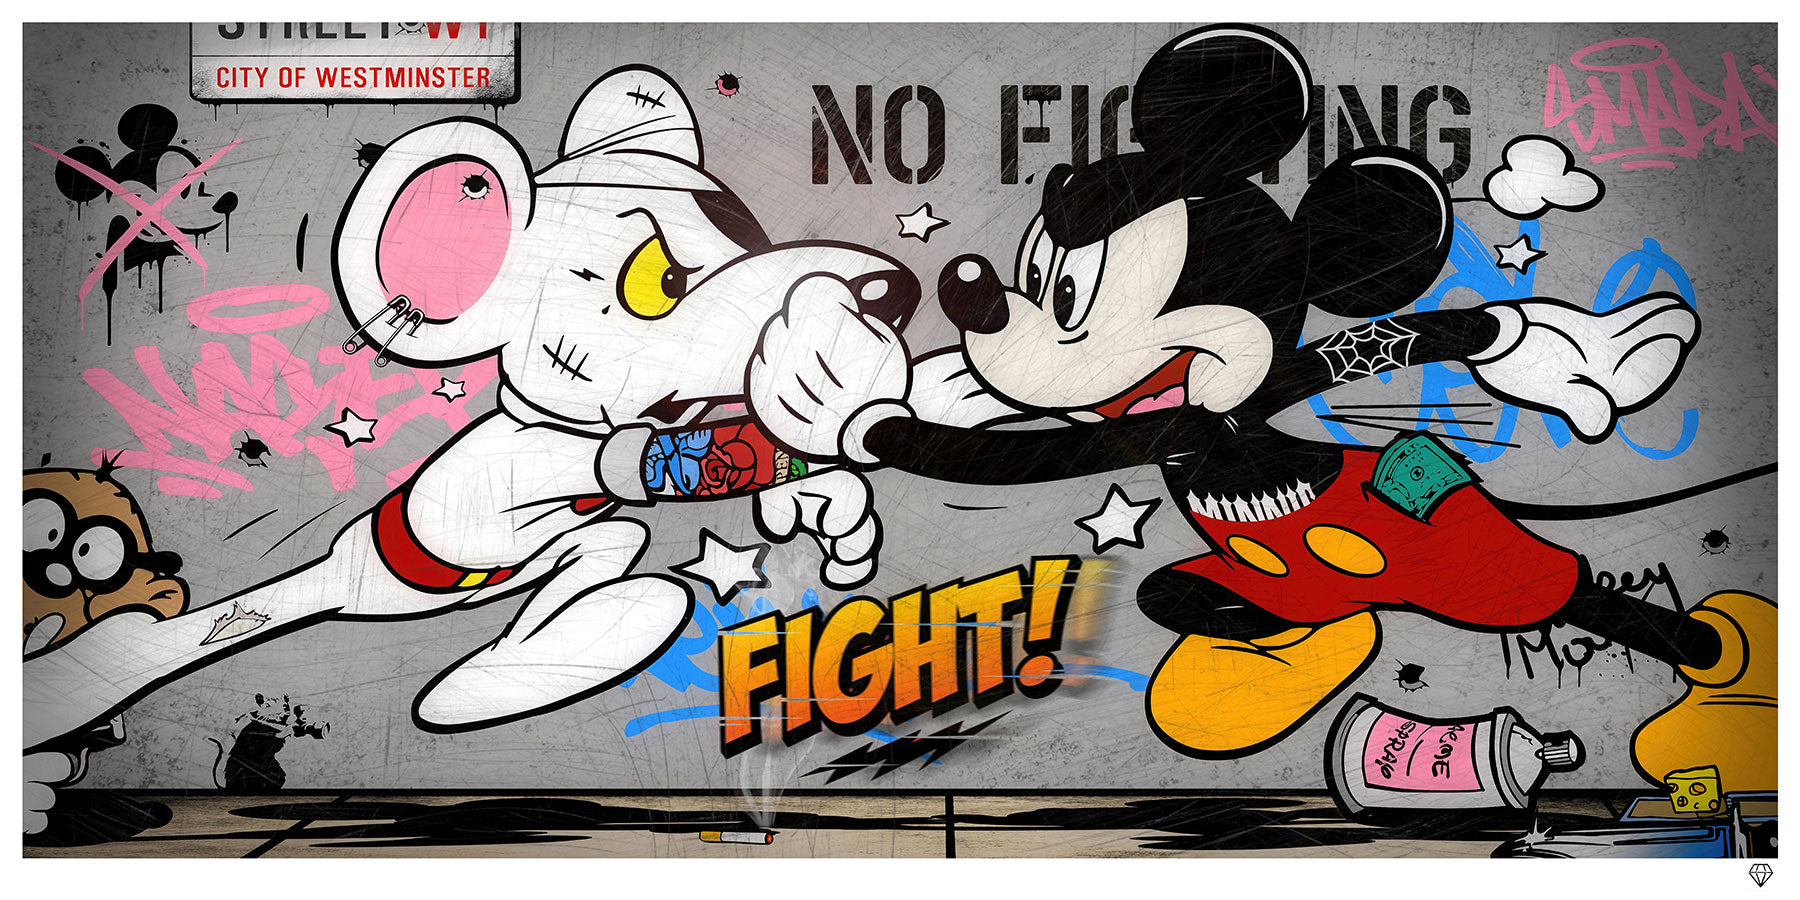 JJ Adams - 'Mouse Fight II' - Framed Limited Edition